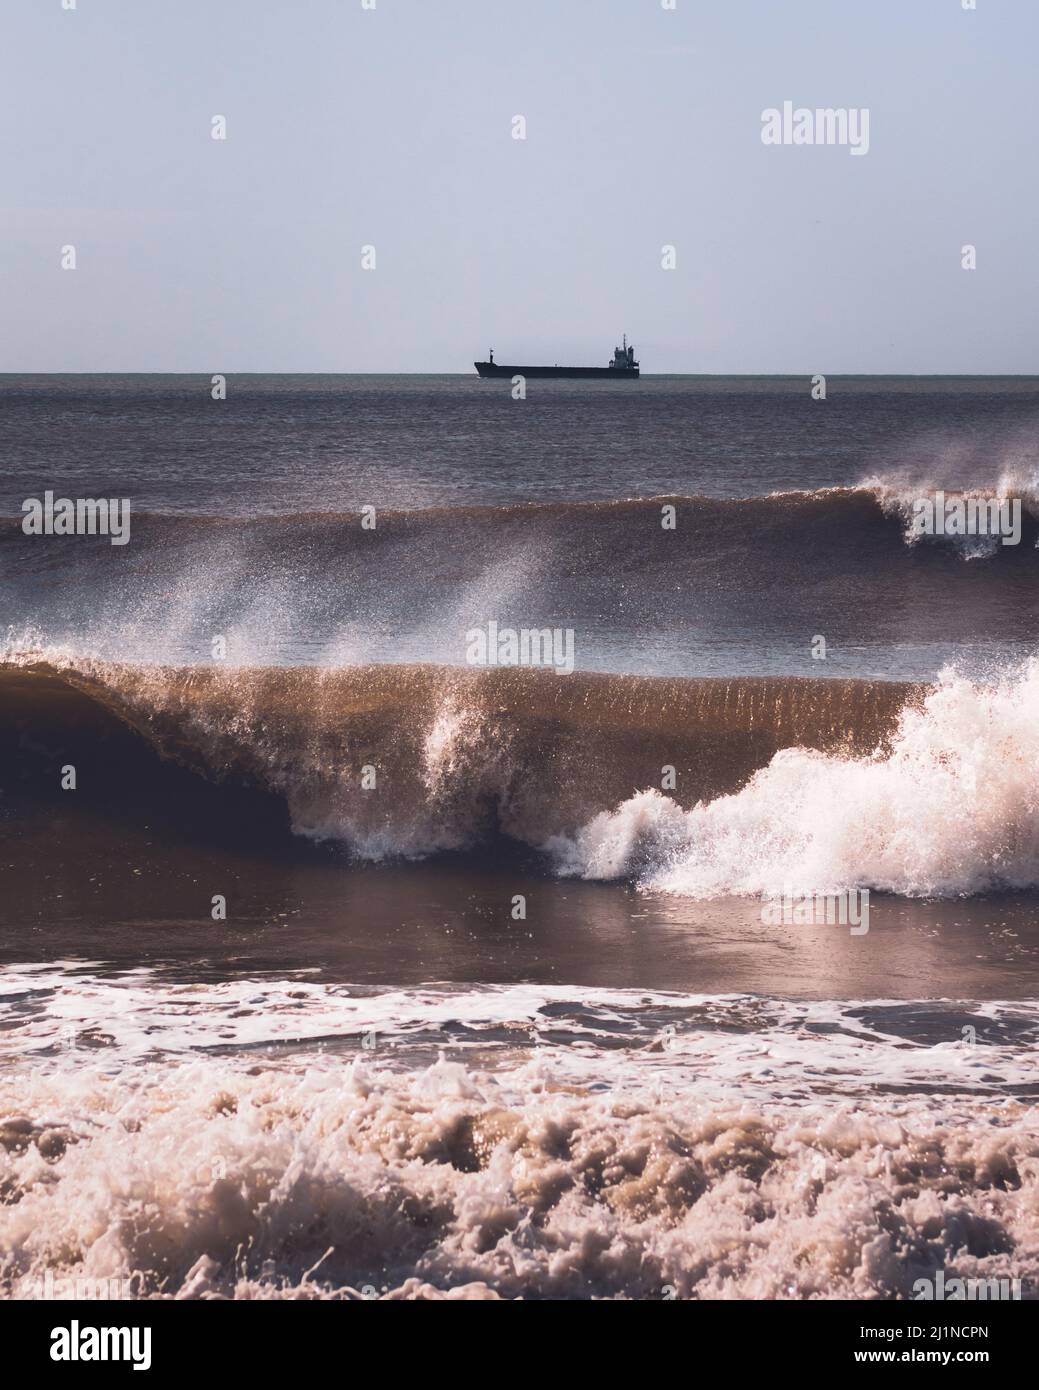 Atlantic ocean waves breaking near the windy coast in Portugal and a small coastal tanker or tank ship far away in the horizon. Vertical composition Stock Photo